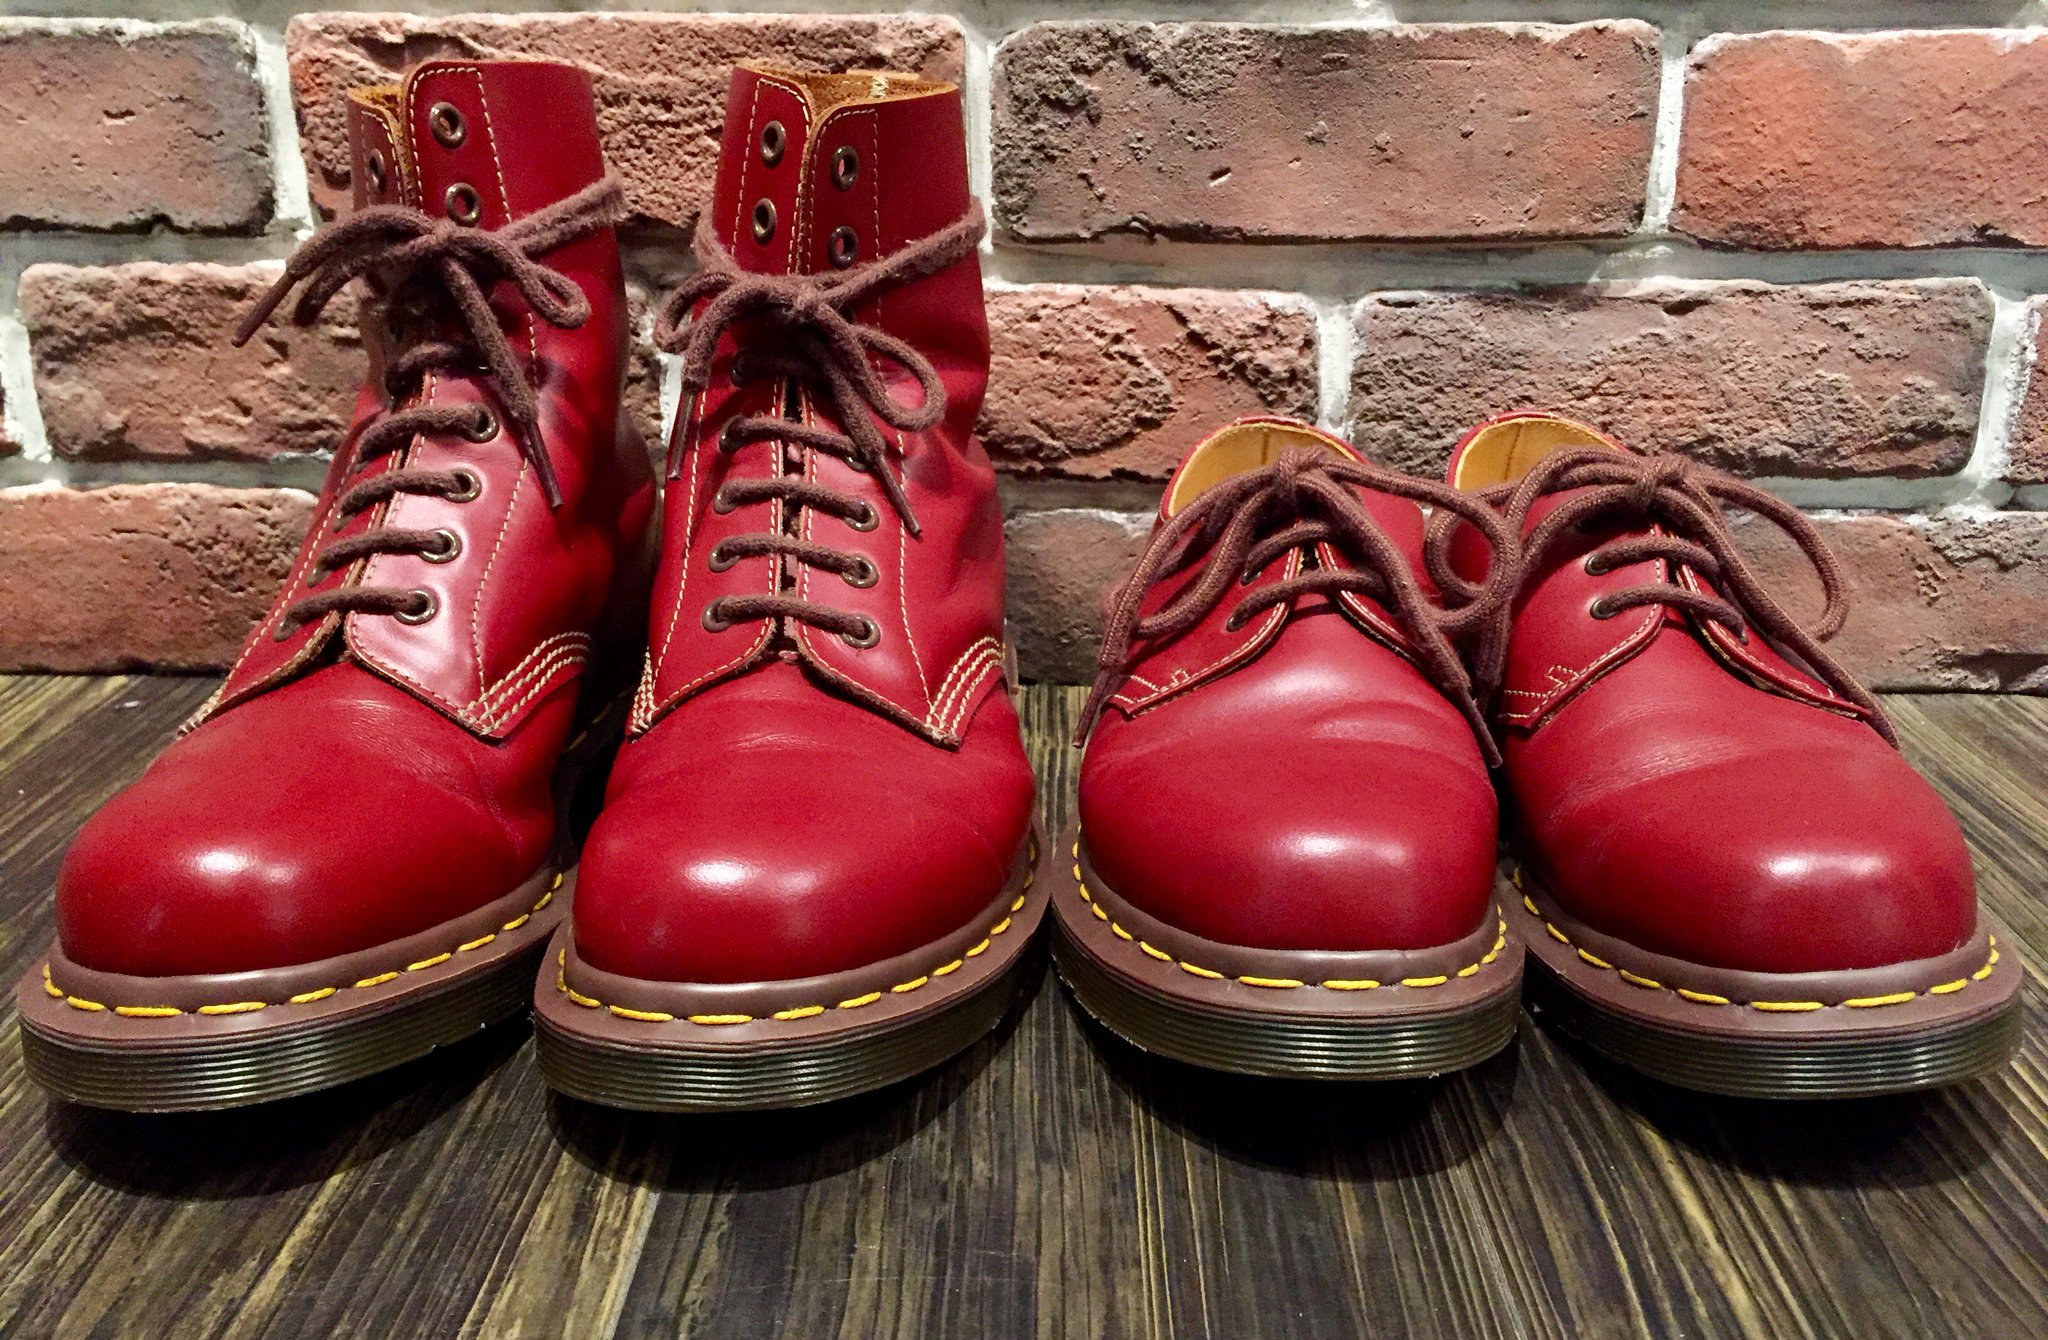 Dr.Martens札幌 on Twitter: "〈再入荷〉 MADE IN ENGLAND VINTAGE ようやく再入荷しました